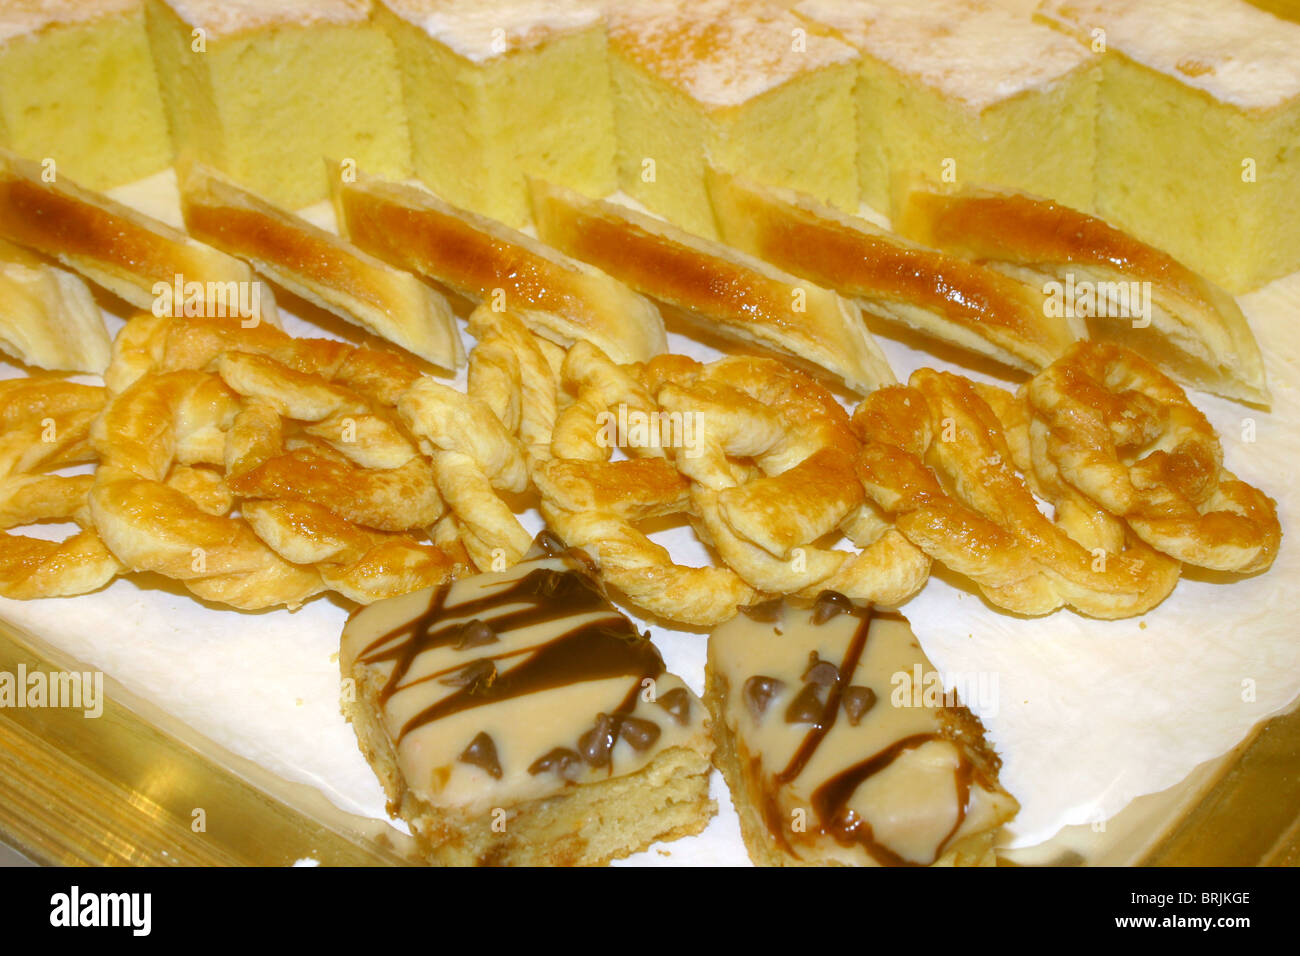 Bite sized pastry deserts on a tray. Stock Photo